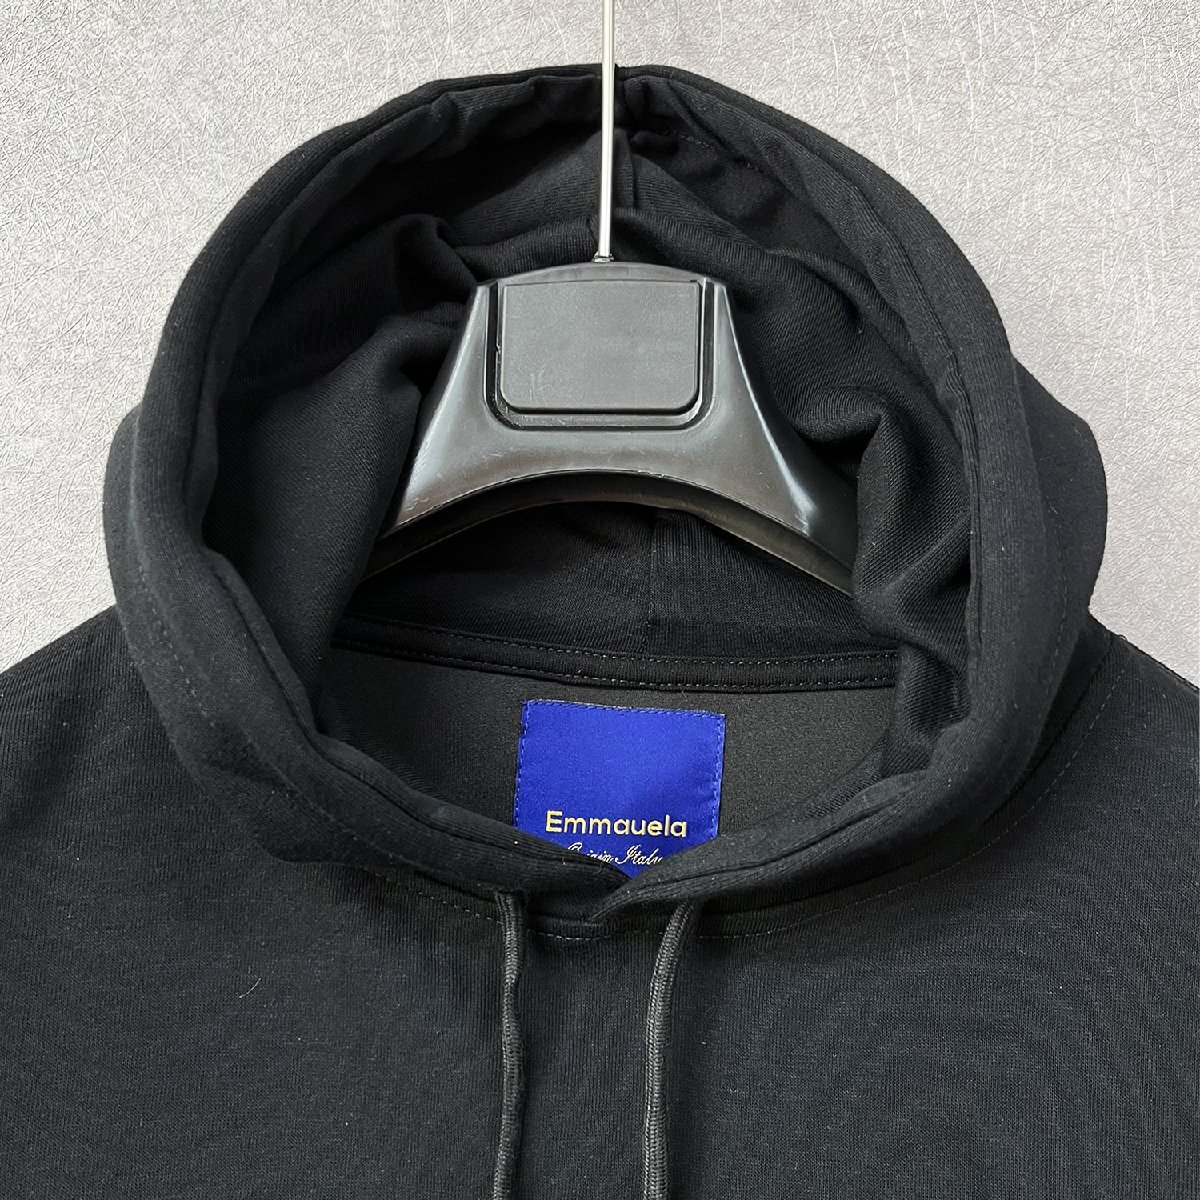  piece .* Parker regular price 4 ten thousand *Emmauela* Italy * milano departure * comfortable heat insulation soft robot playing heart hand .. manner cut and sewn sweat L/48 size 